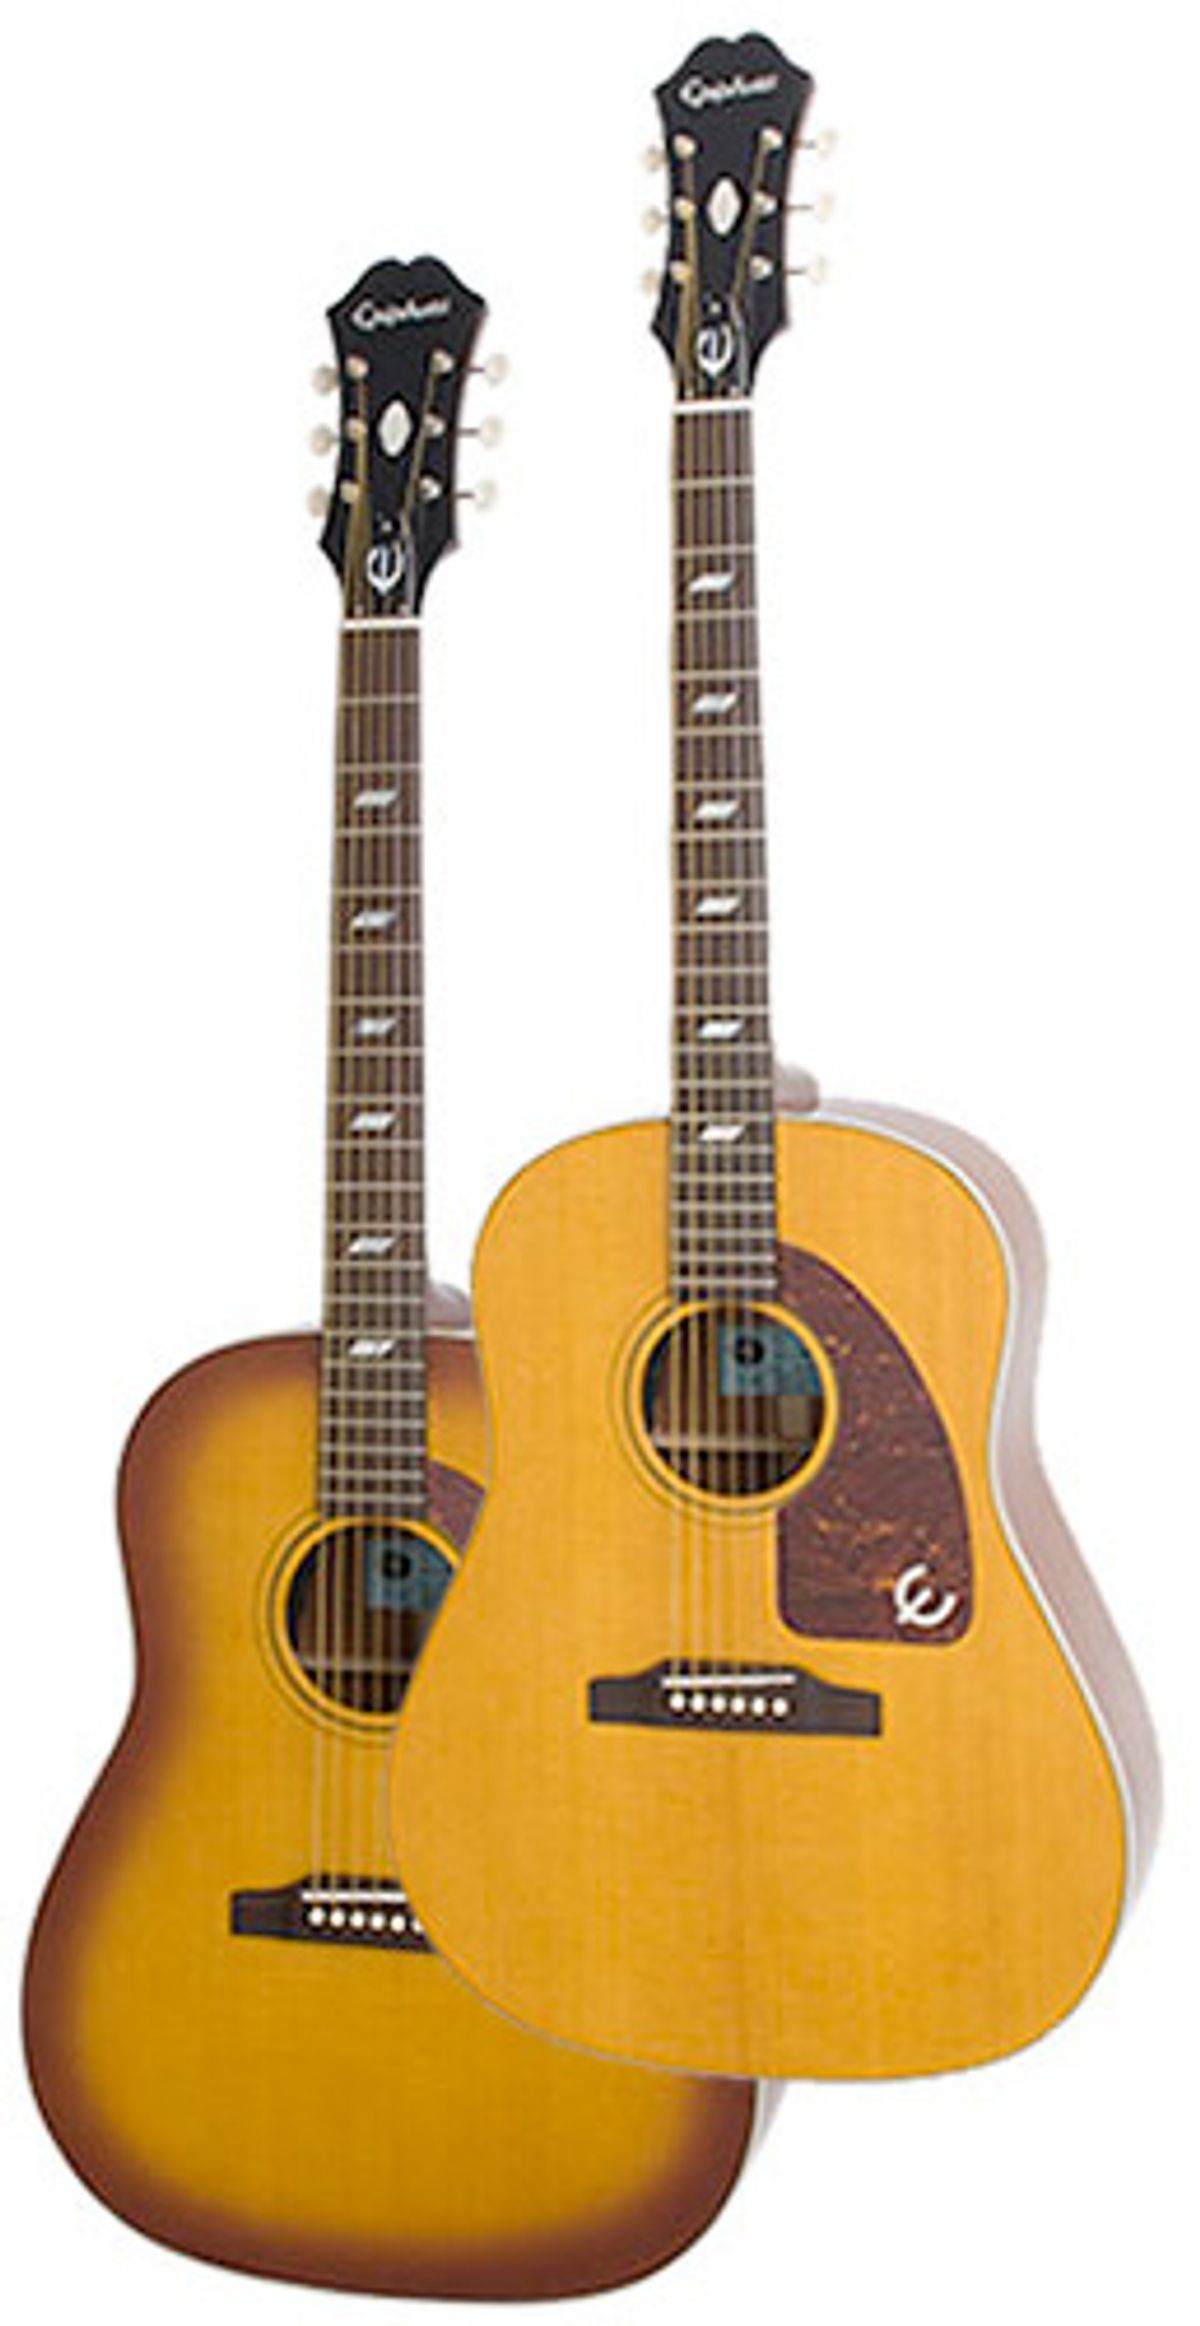 Epiphone Releases “Inspired By” 1964 Texan Acoustic/Electric